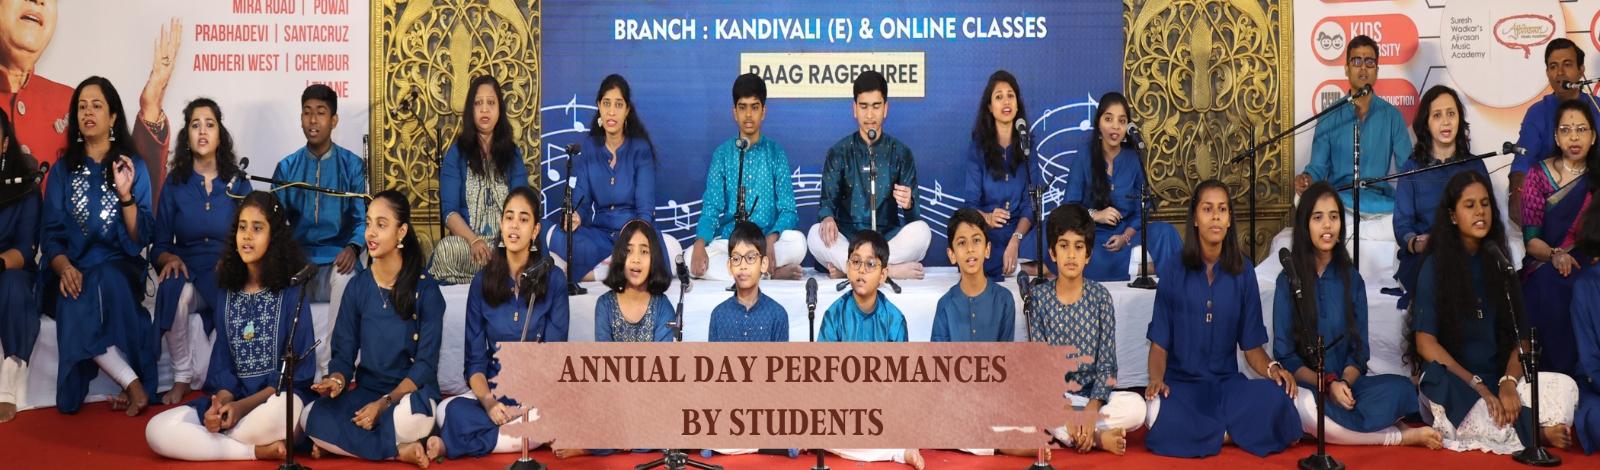 ANNUAL DAY PERFORMANCES BY STUDENTS Ajivasan Music and Dance Academy